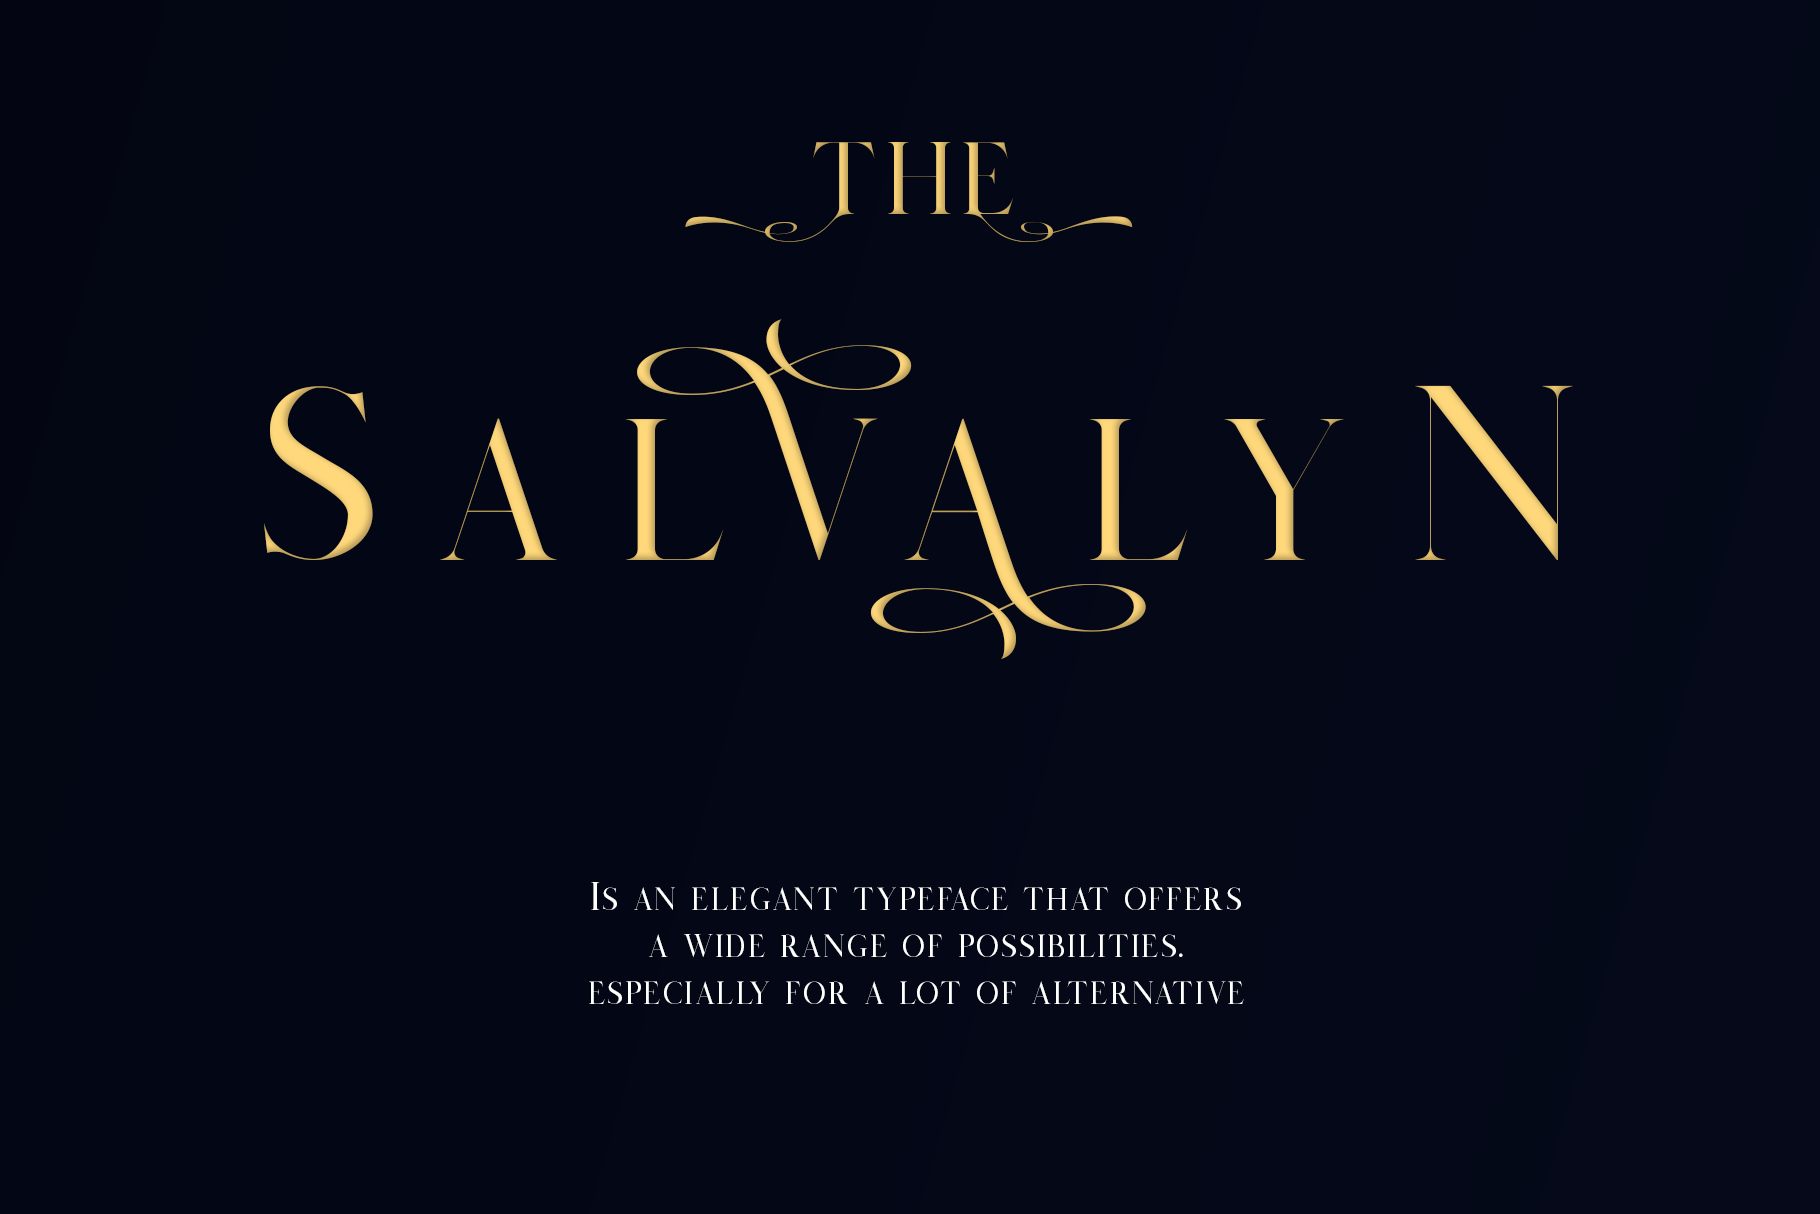 Salvalyn - Stylistic Serif Font, Fonts | GraphicRiver